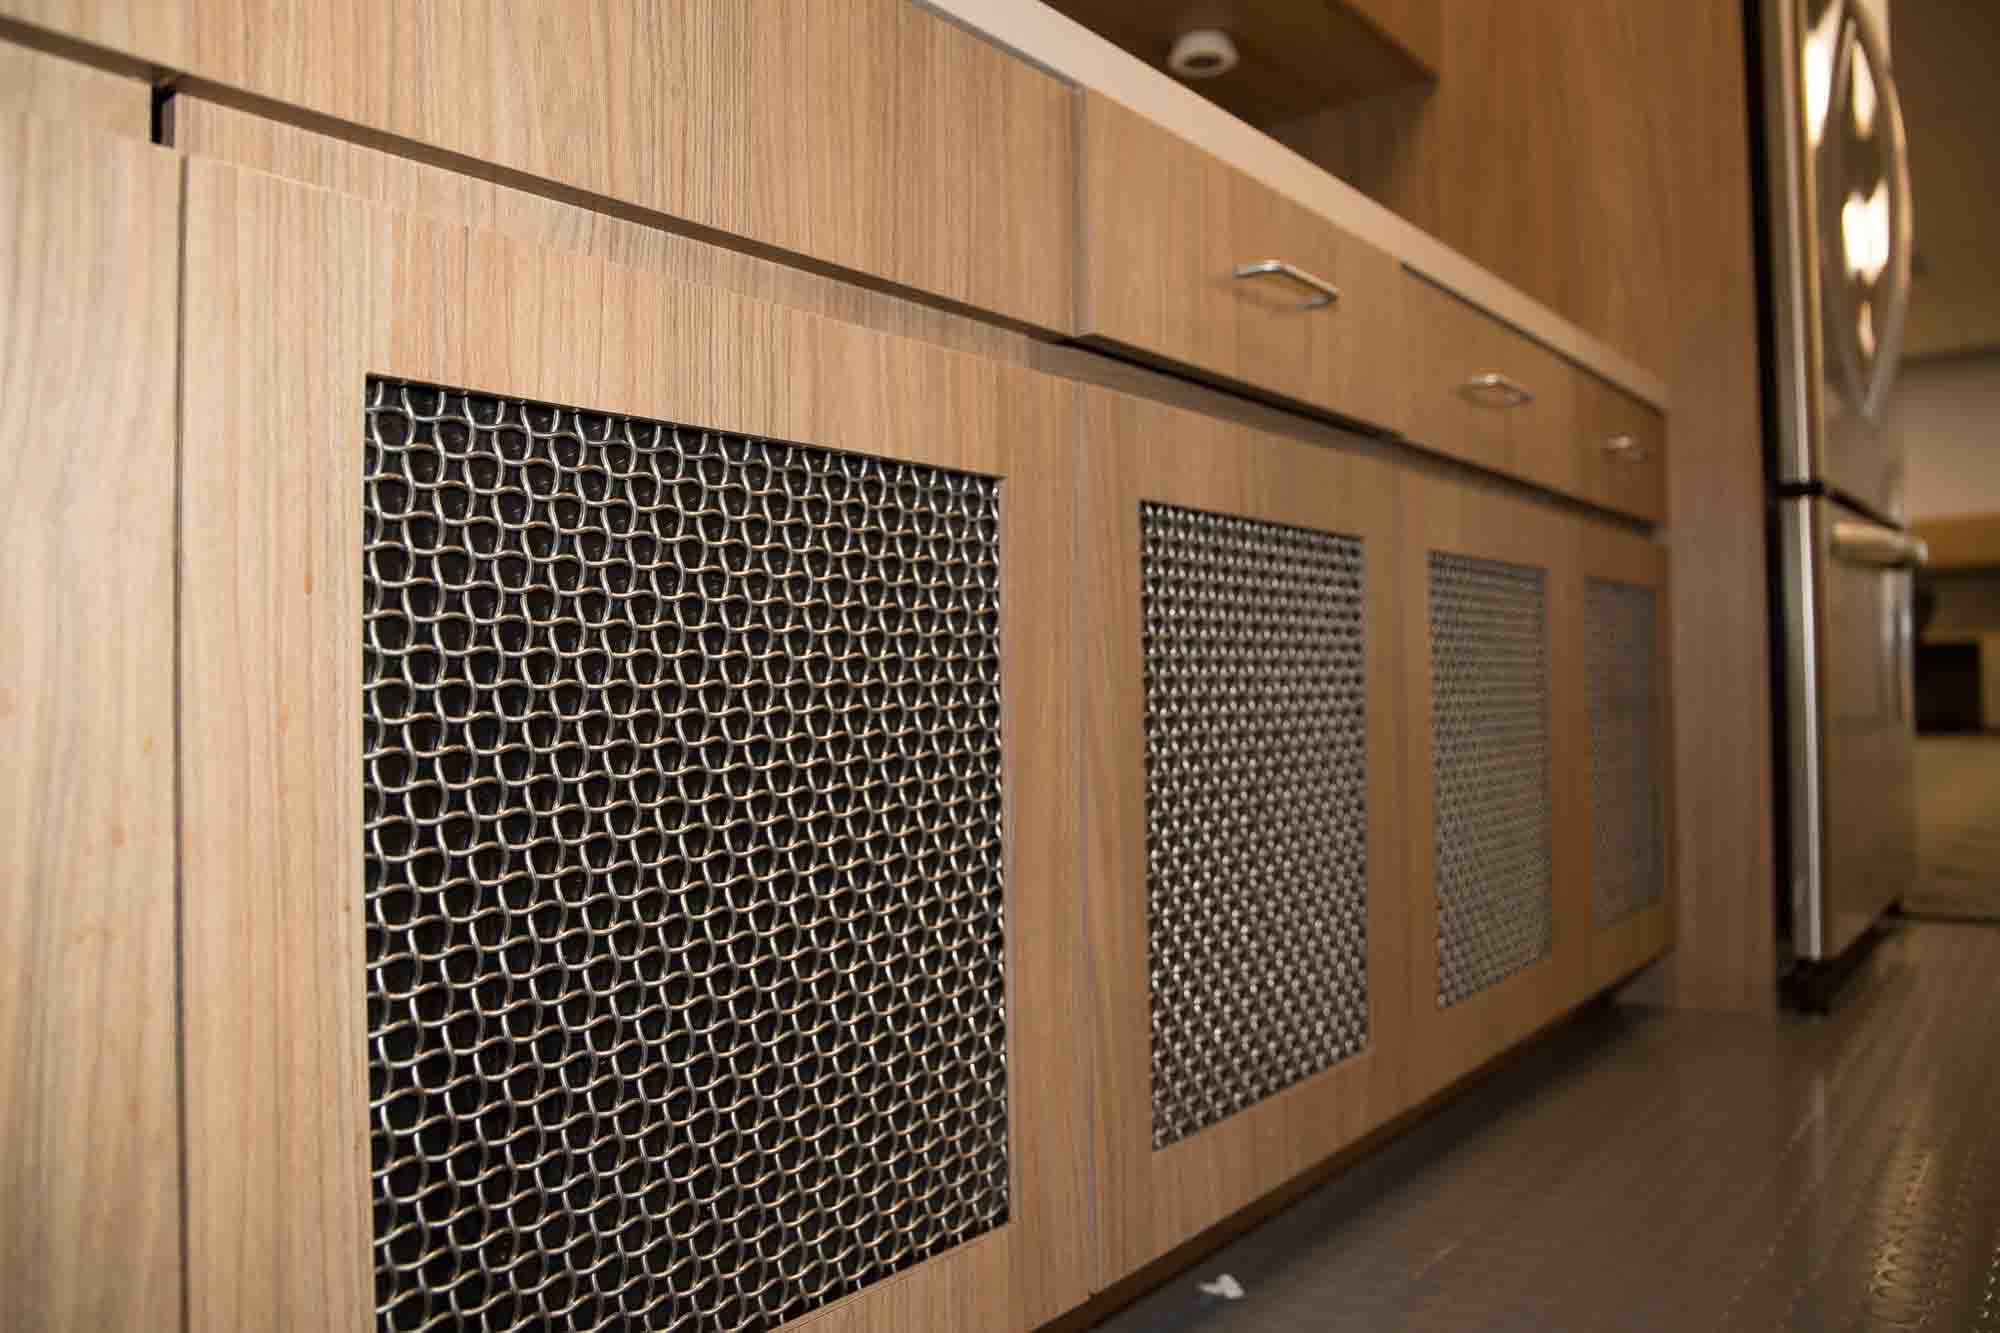 Woven Wire Mesh being used as inserts for wooden cabinets.